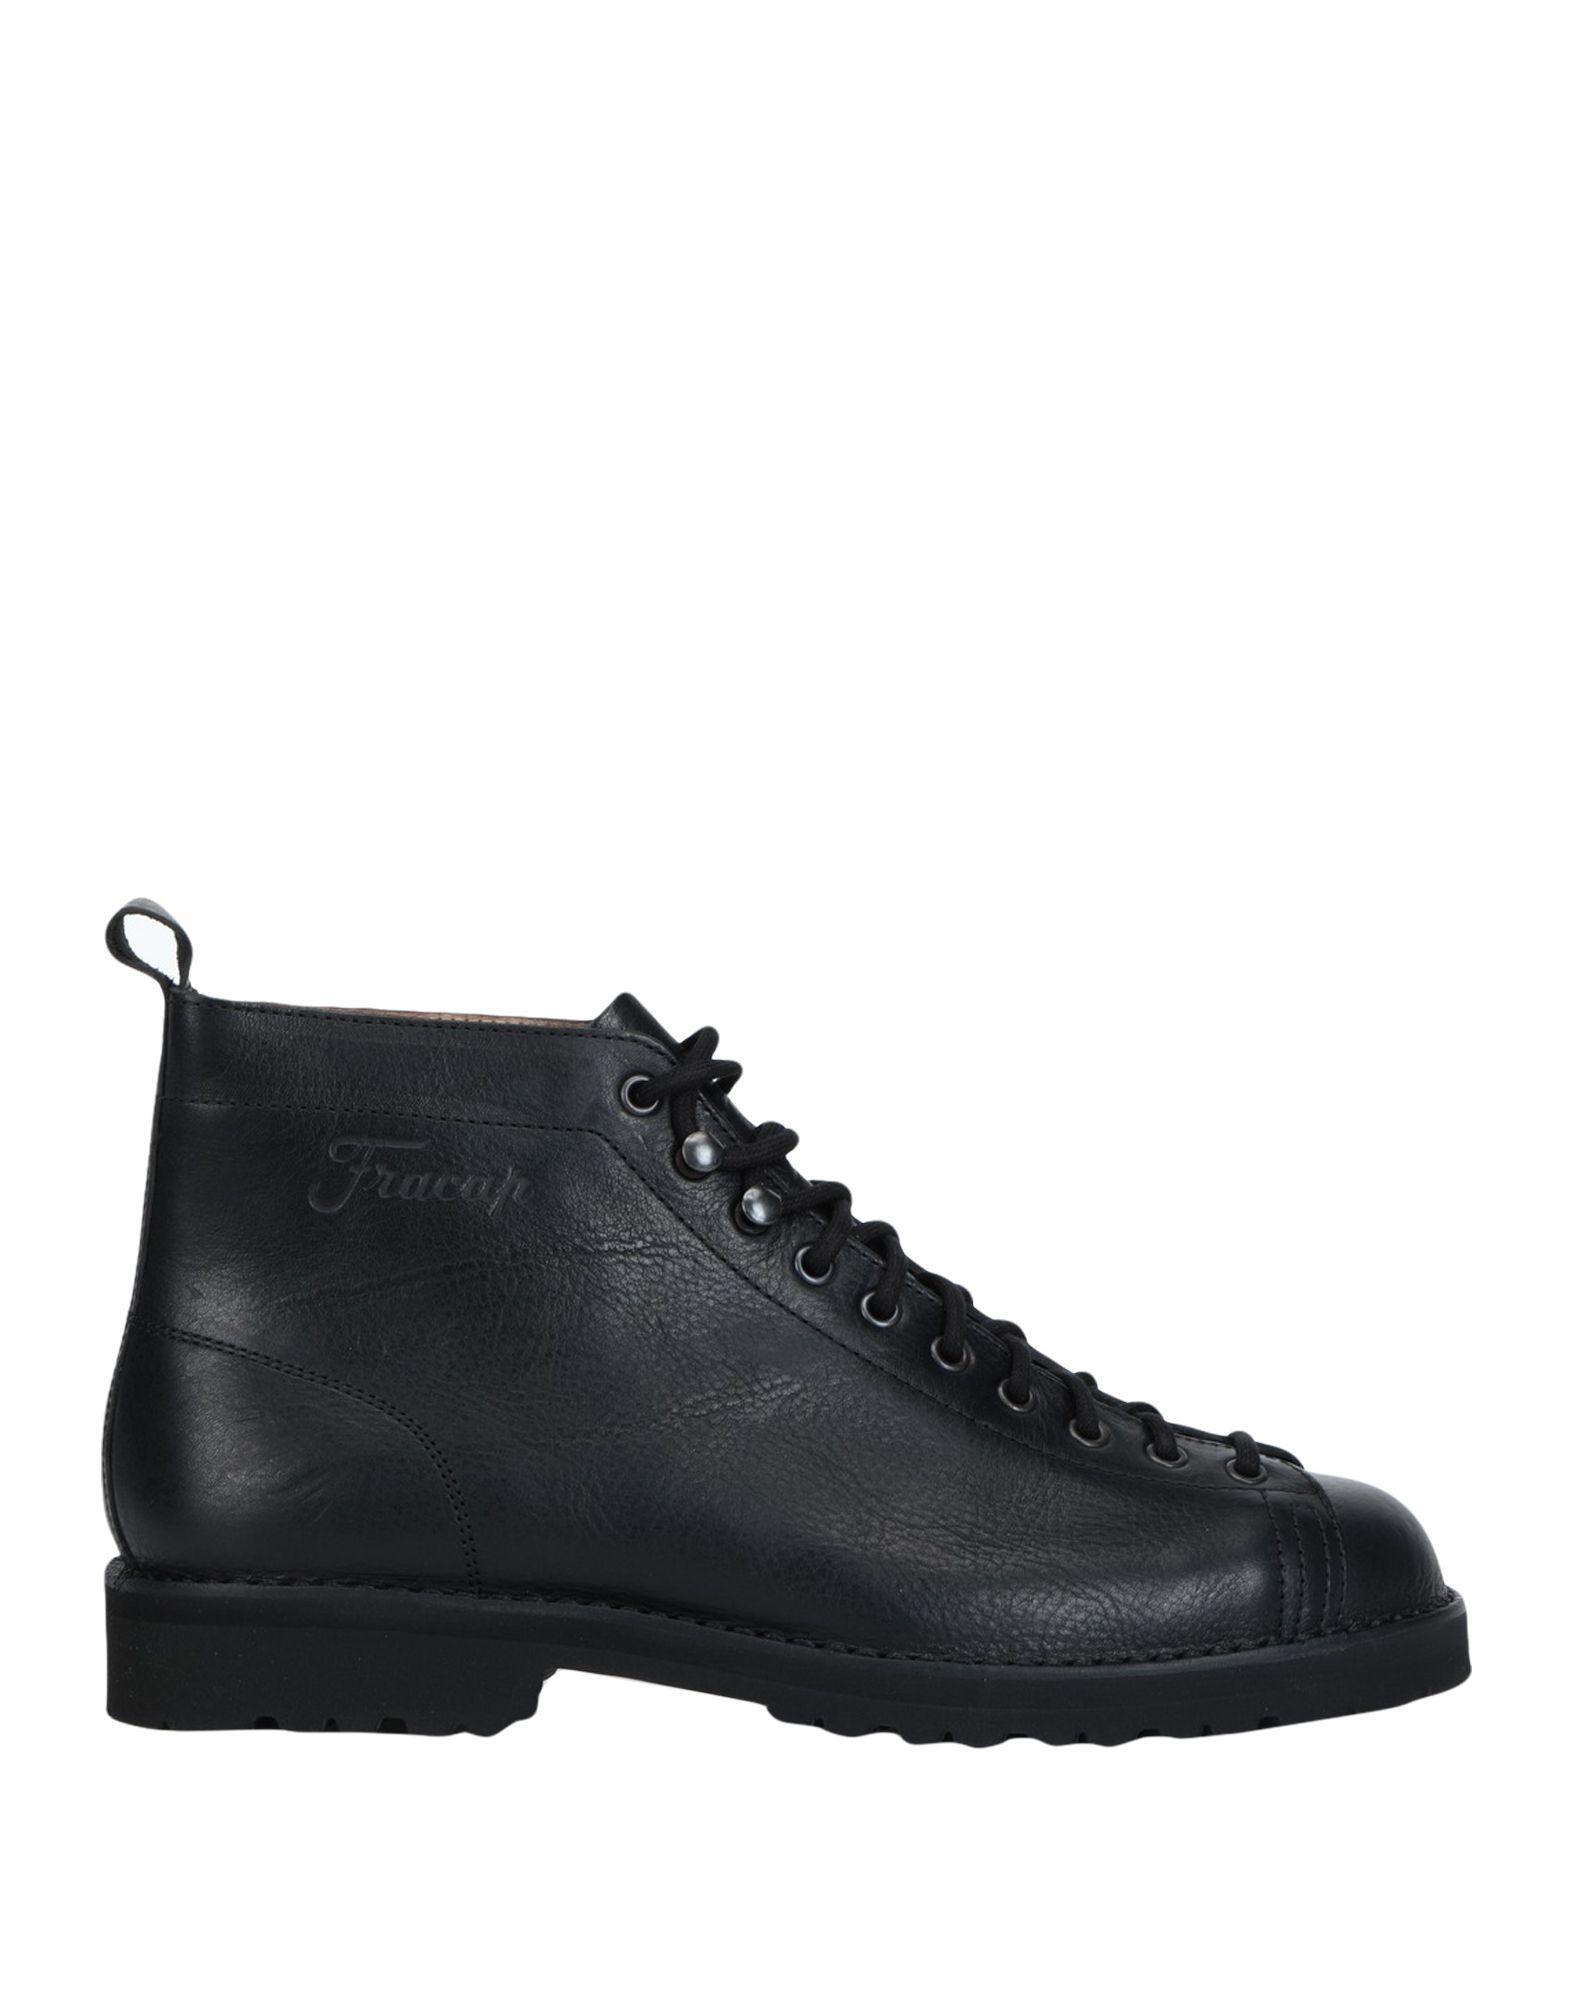 Fracap Leather Ankle Boots in Black for Men - Lyst